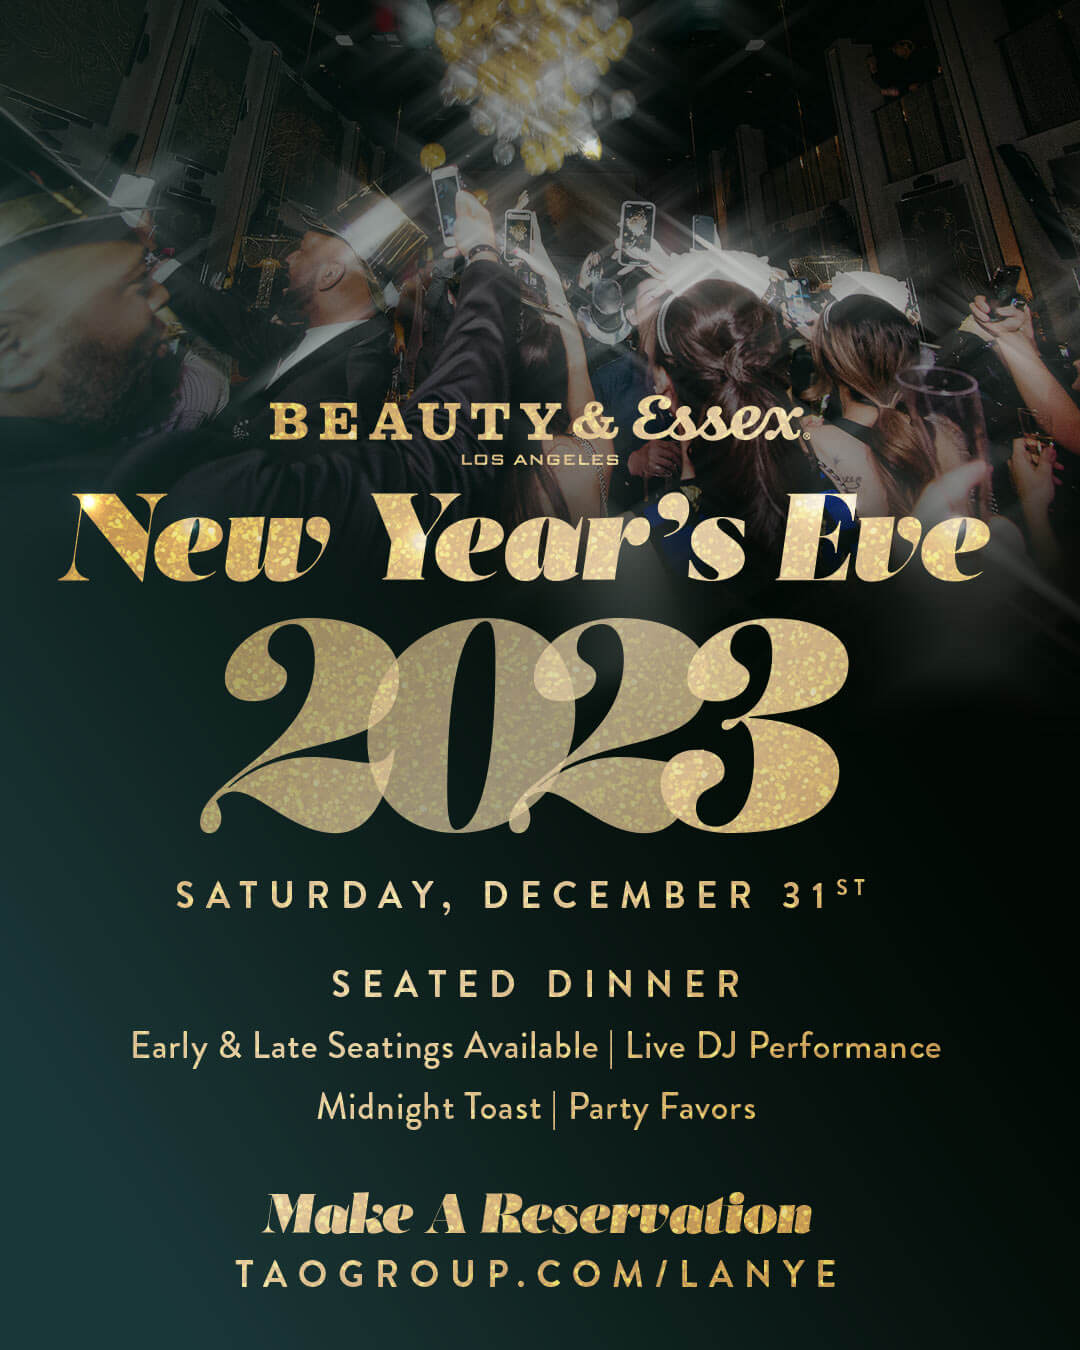 Beauty & Essex Los Angeles New Year's Eve